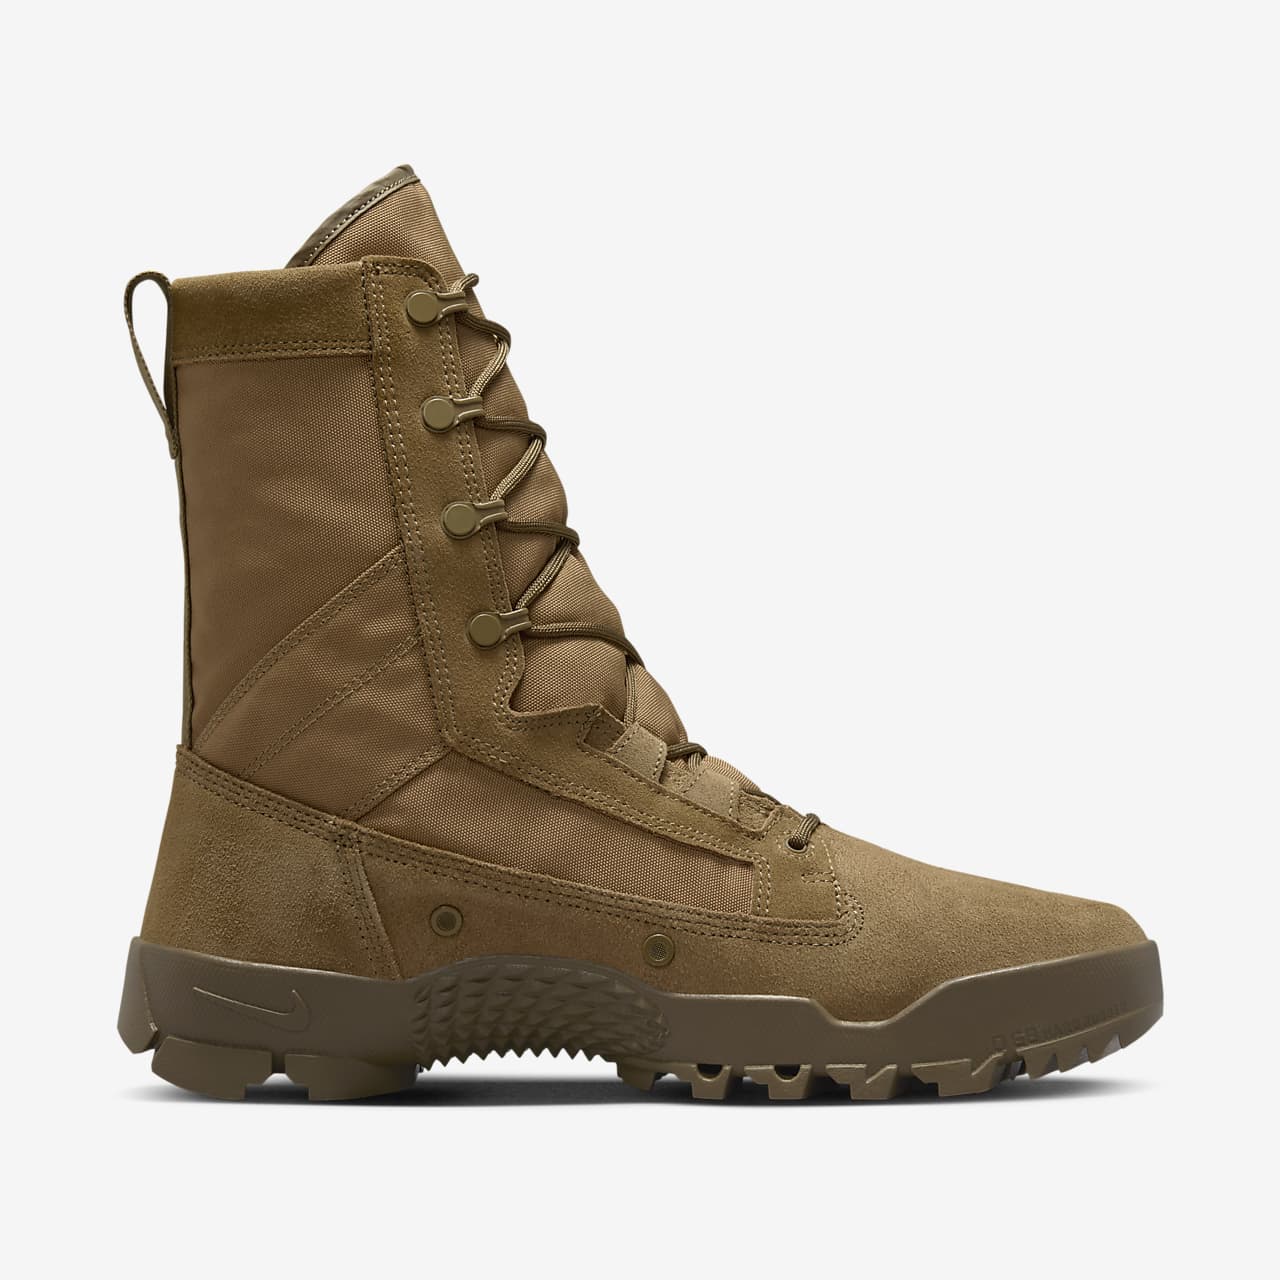 Coyote Brown Jungle Boots | vlr.eng.br